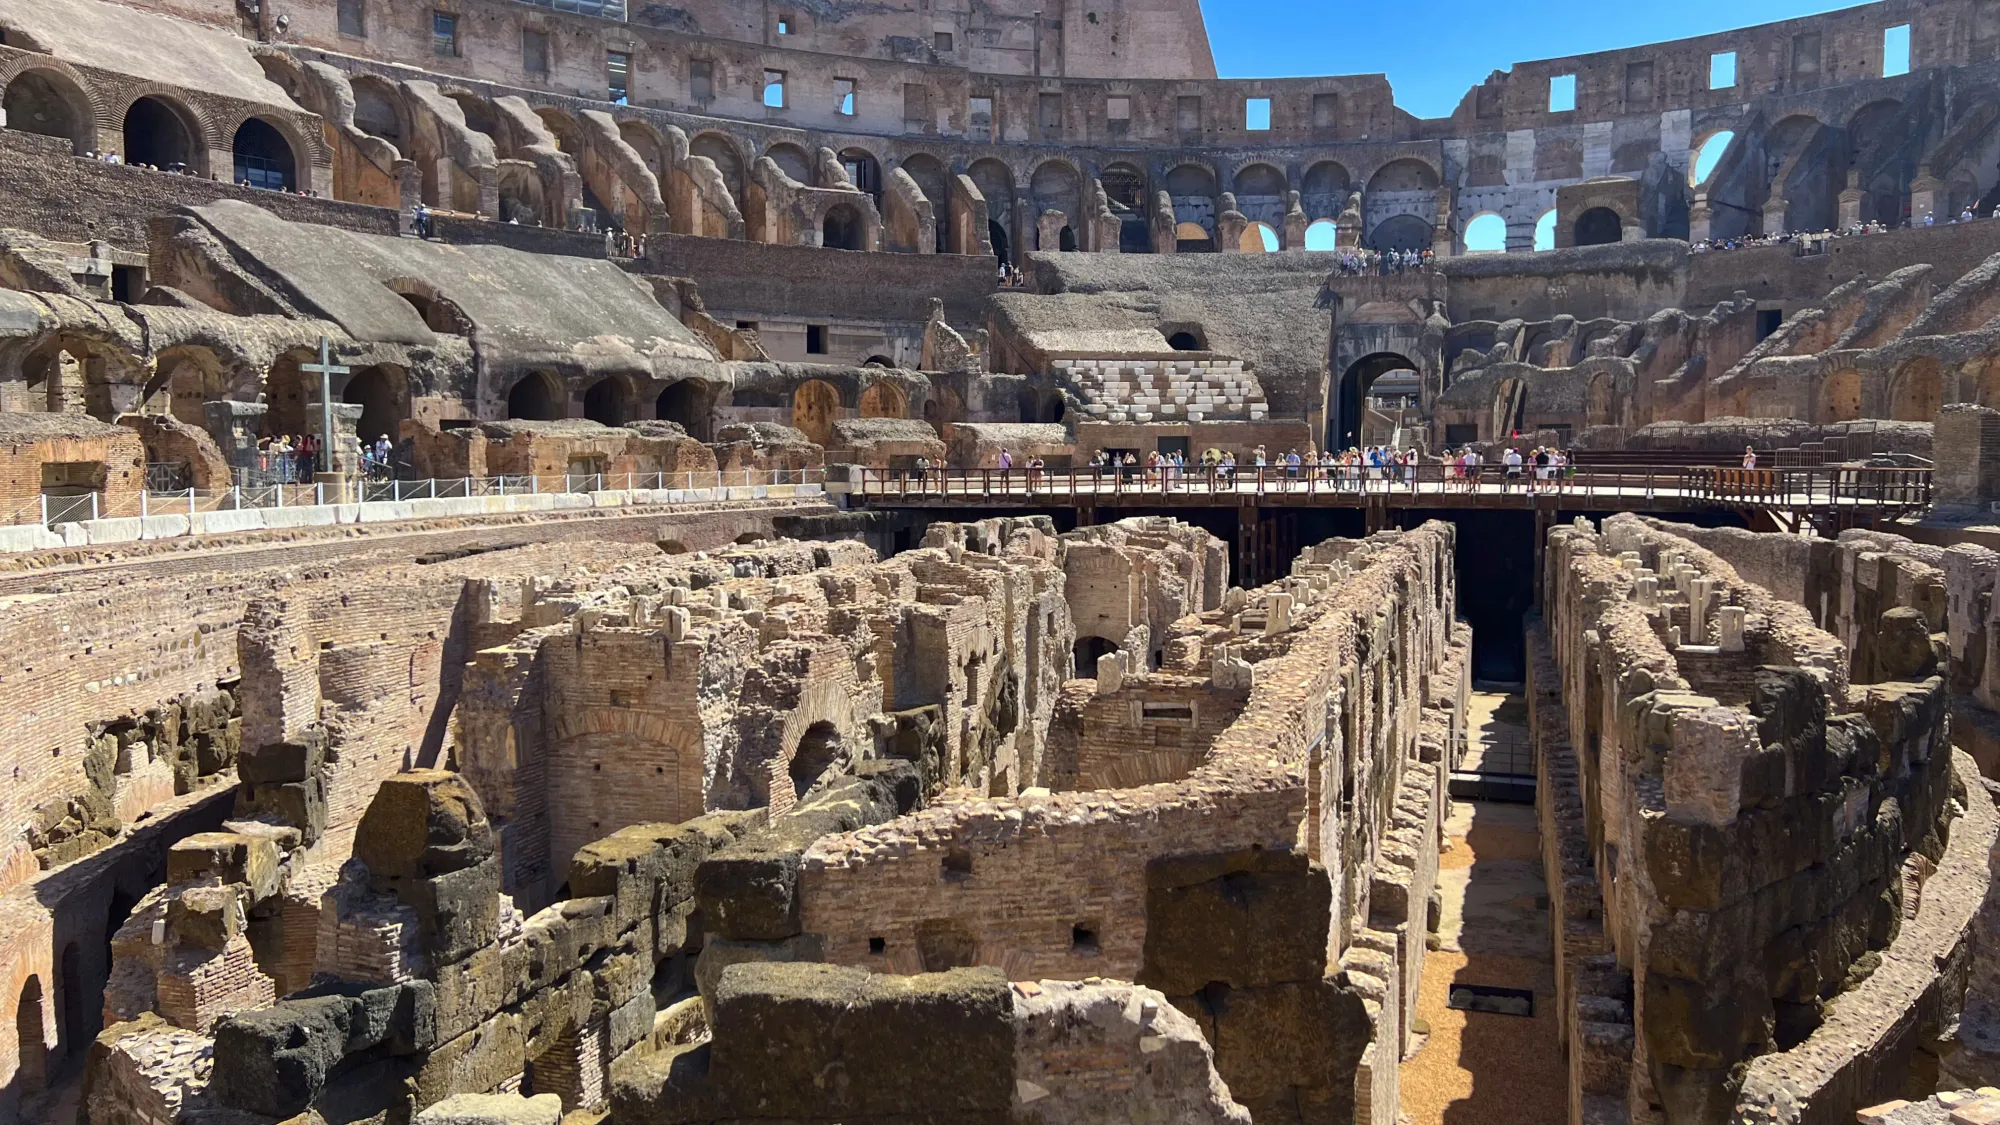 Under what was the colosseum floor, and section of the colosseum.